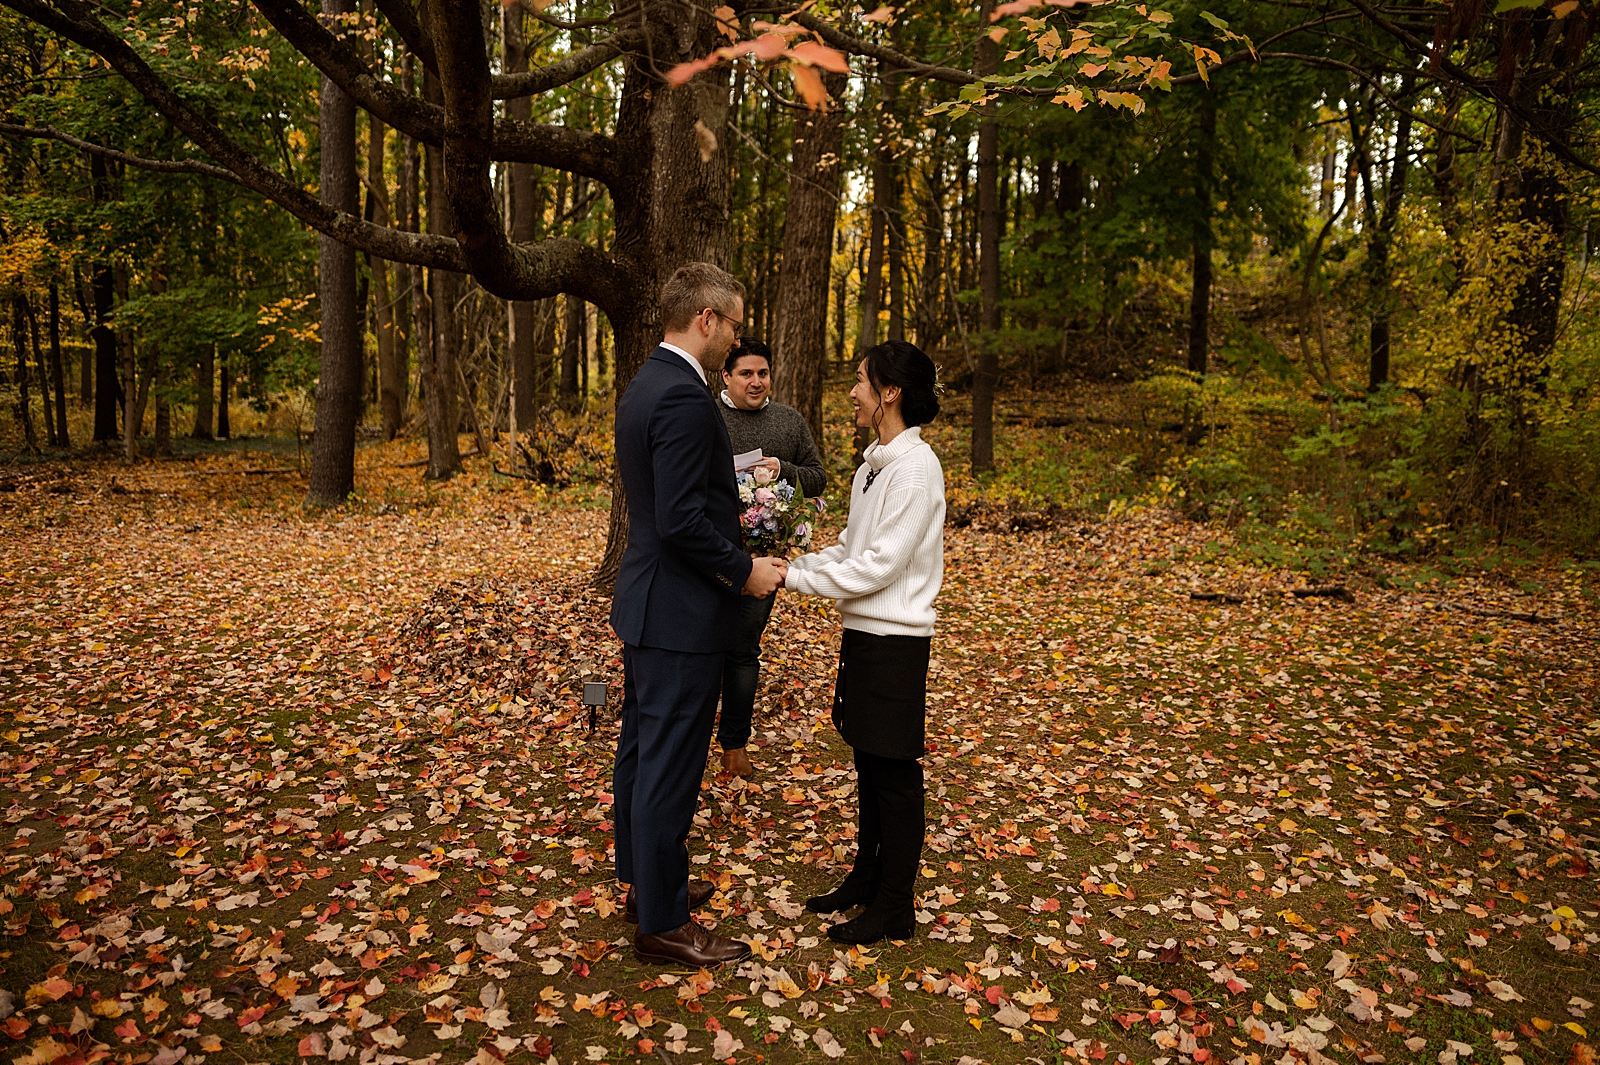 Bride and Groom hand in hand for elopement ceremony in autumn forest